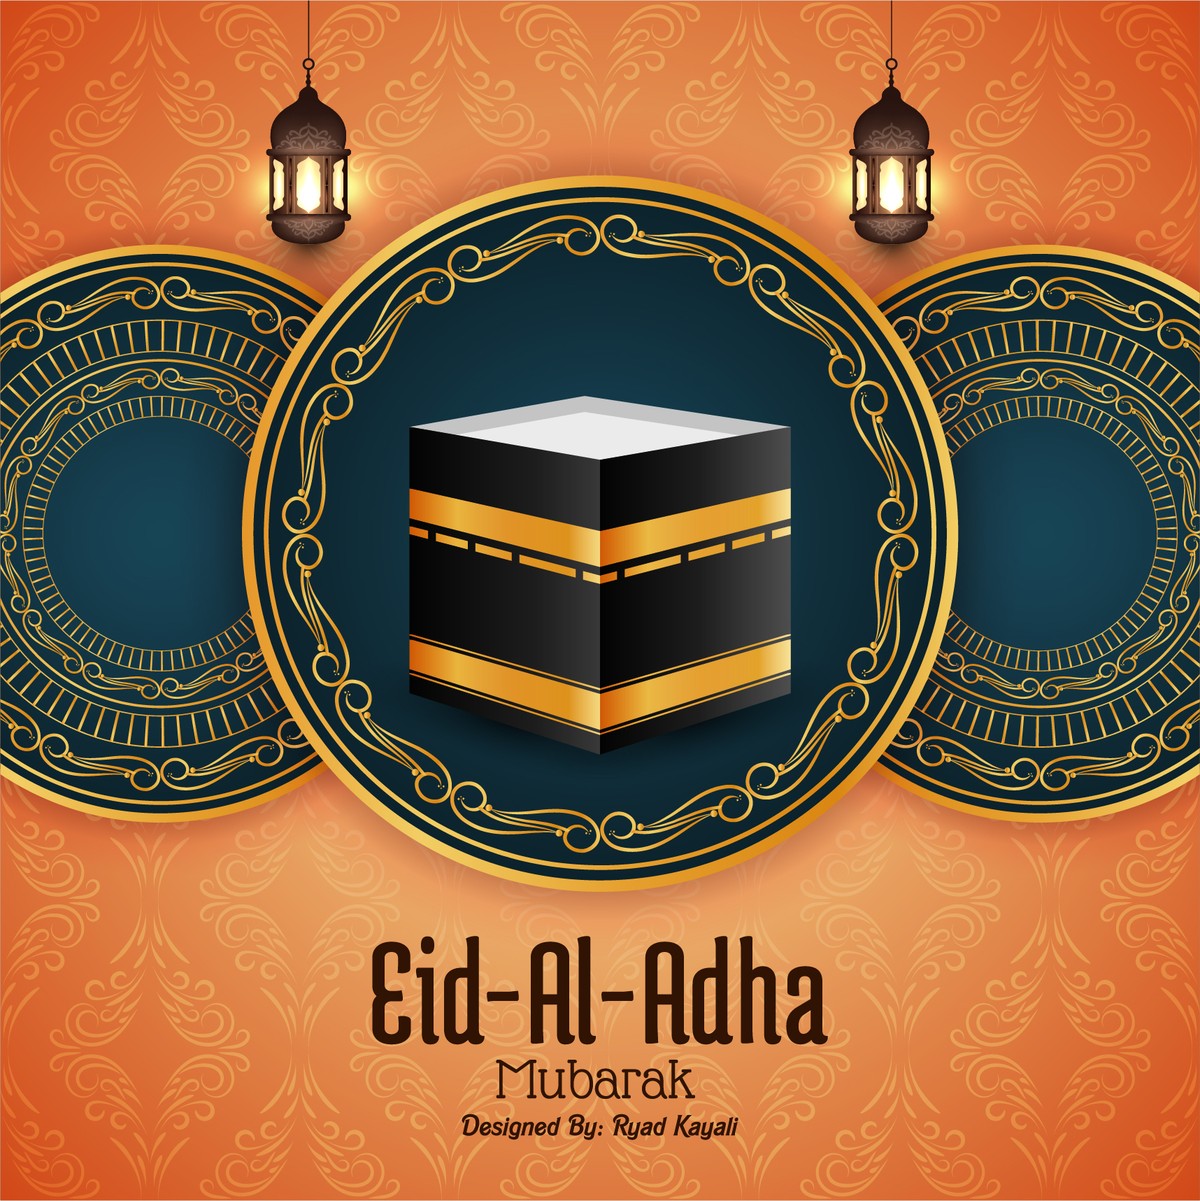 Greeting cards on the occasion of Eid al-Adha